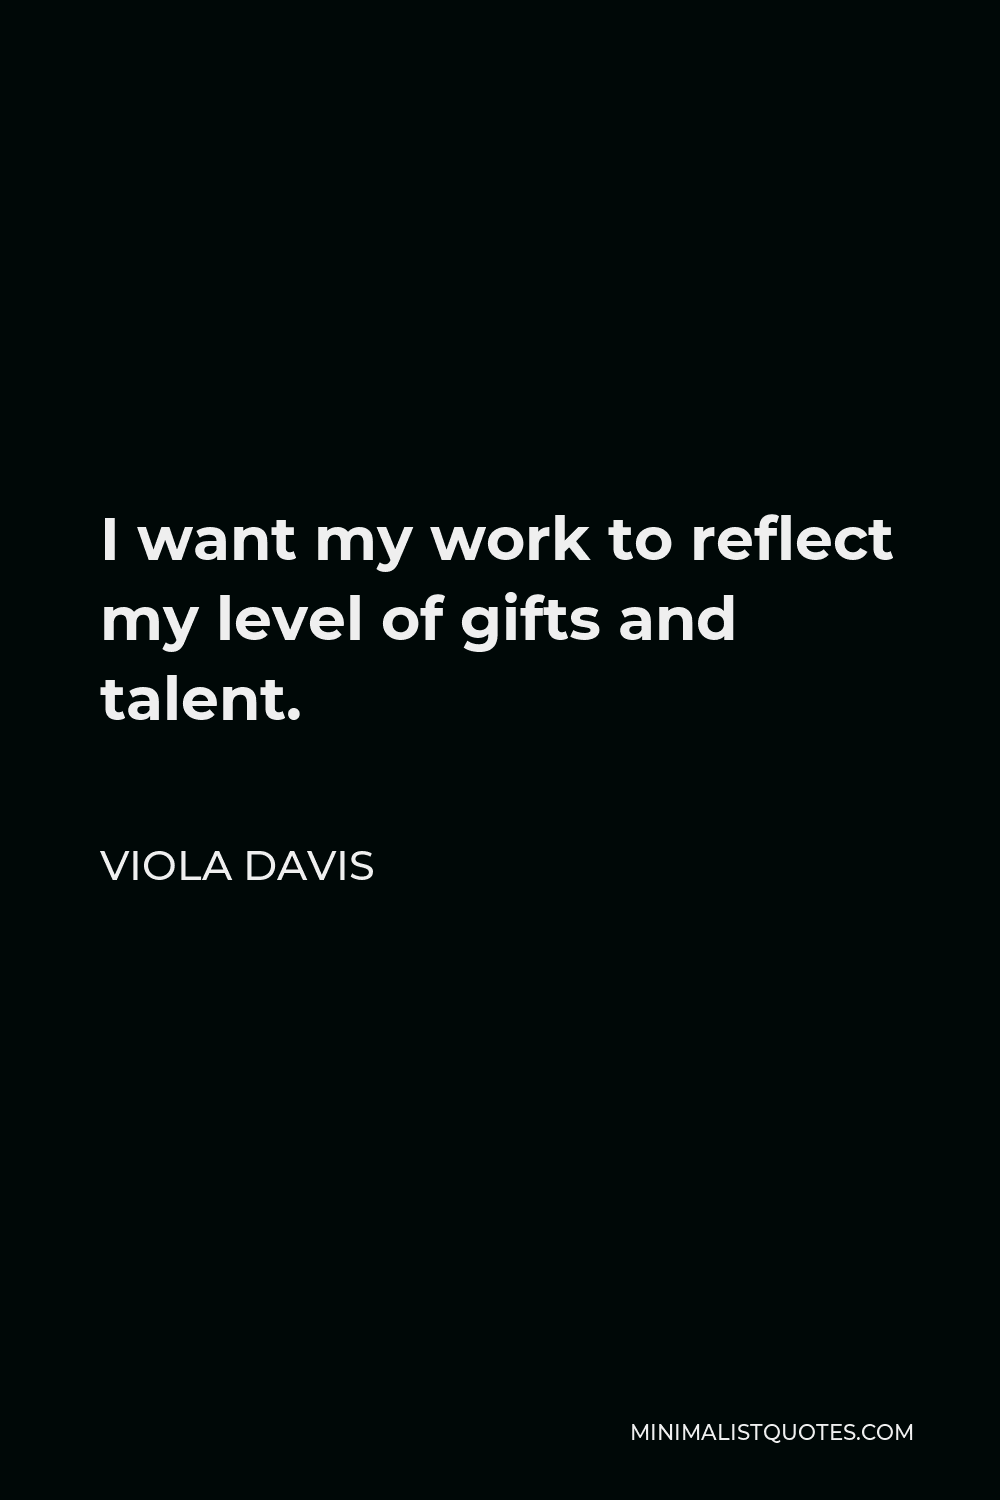 Viola Davis Quote - I want my work to reflect my level of gifts and talent.